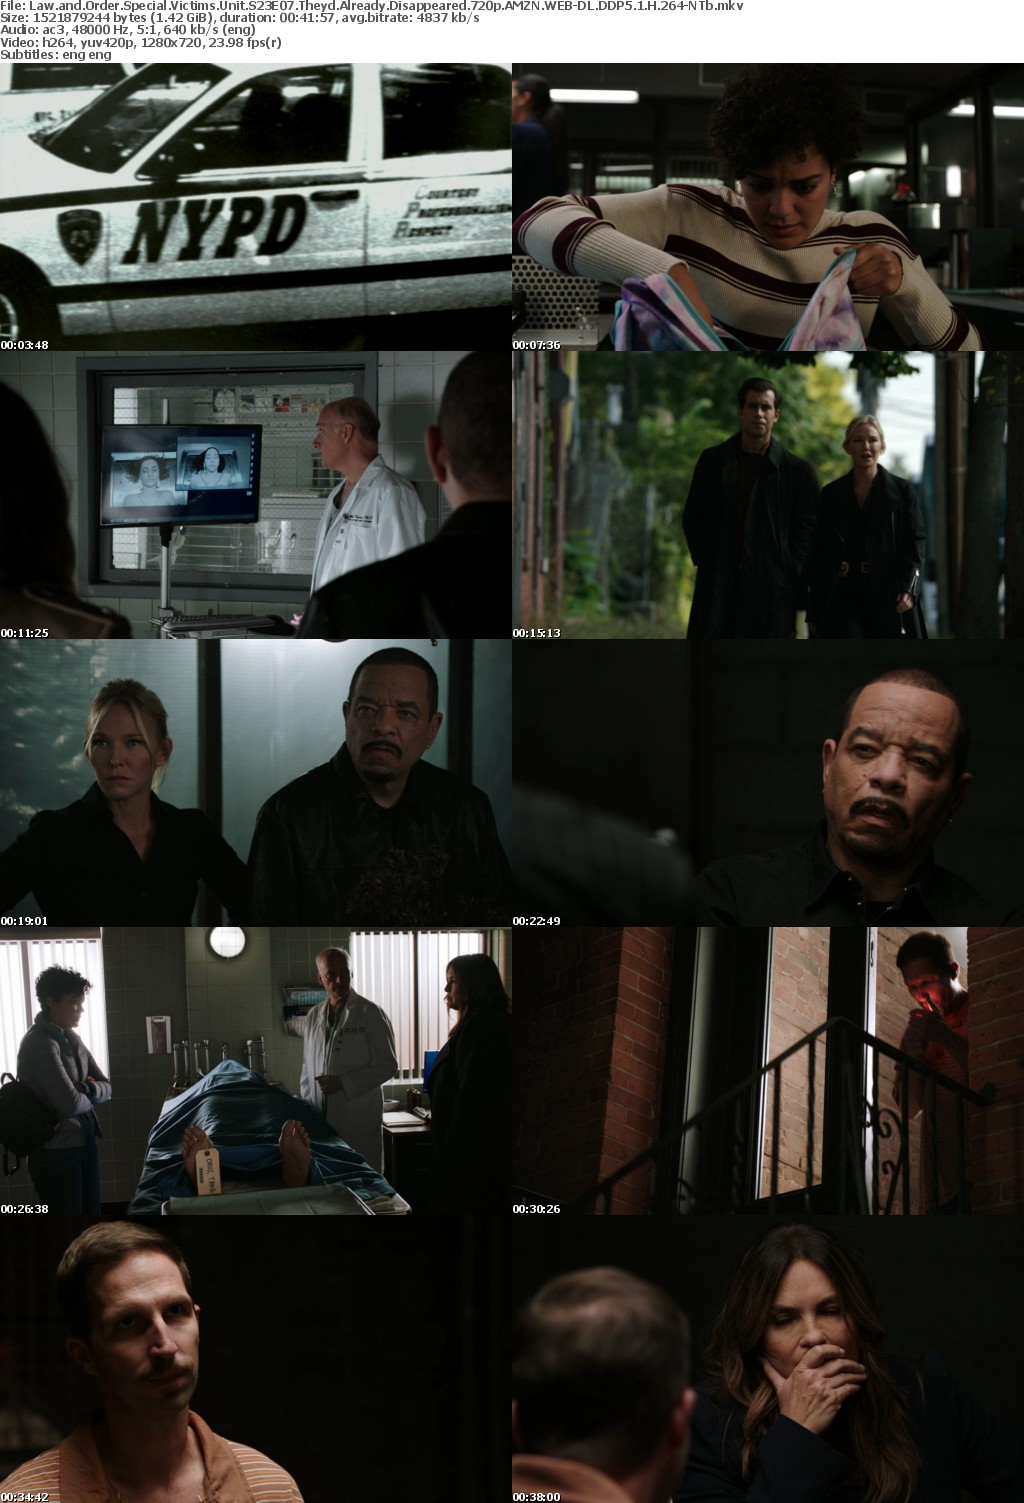 Law and Order SVU S23E07 Theyd Already Disappeared 720p AMZN WEBRip DDP5 1 x264-BTN